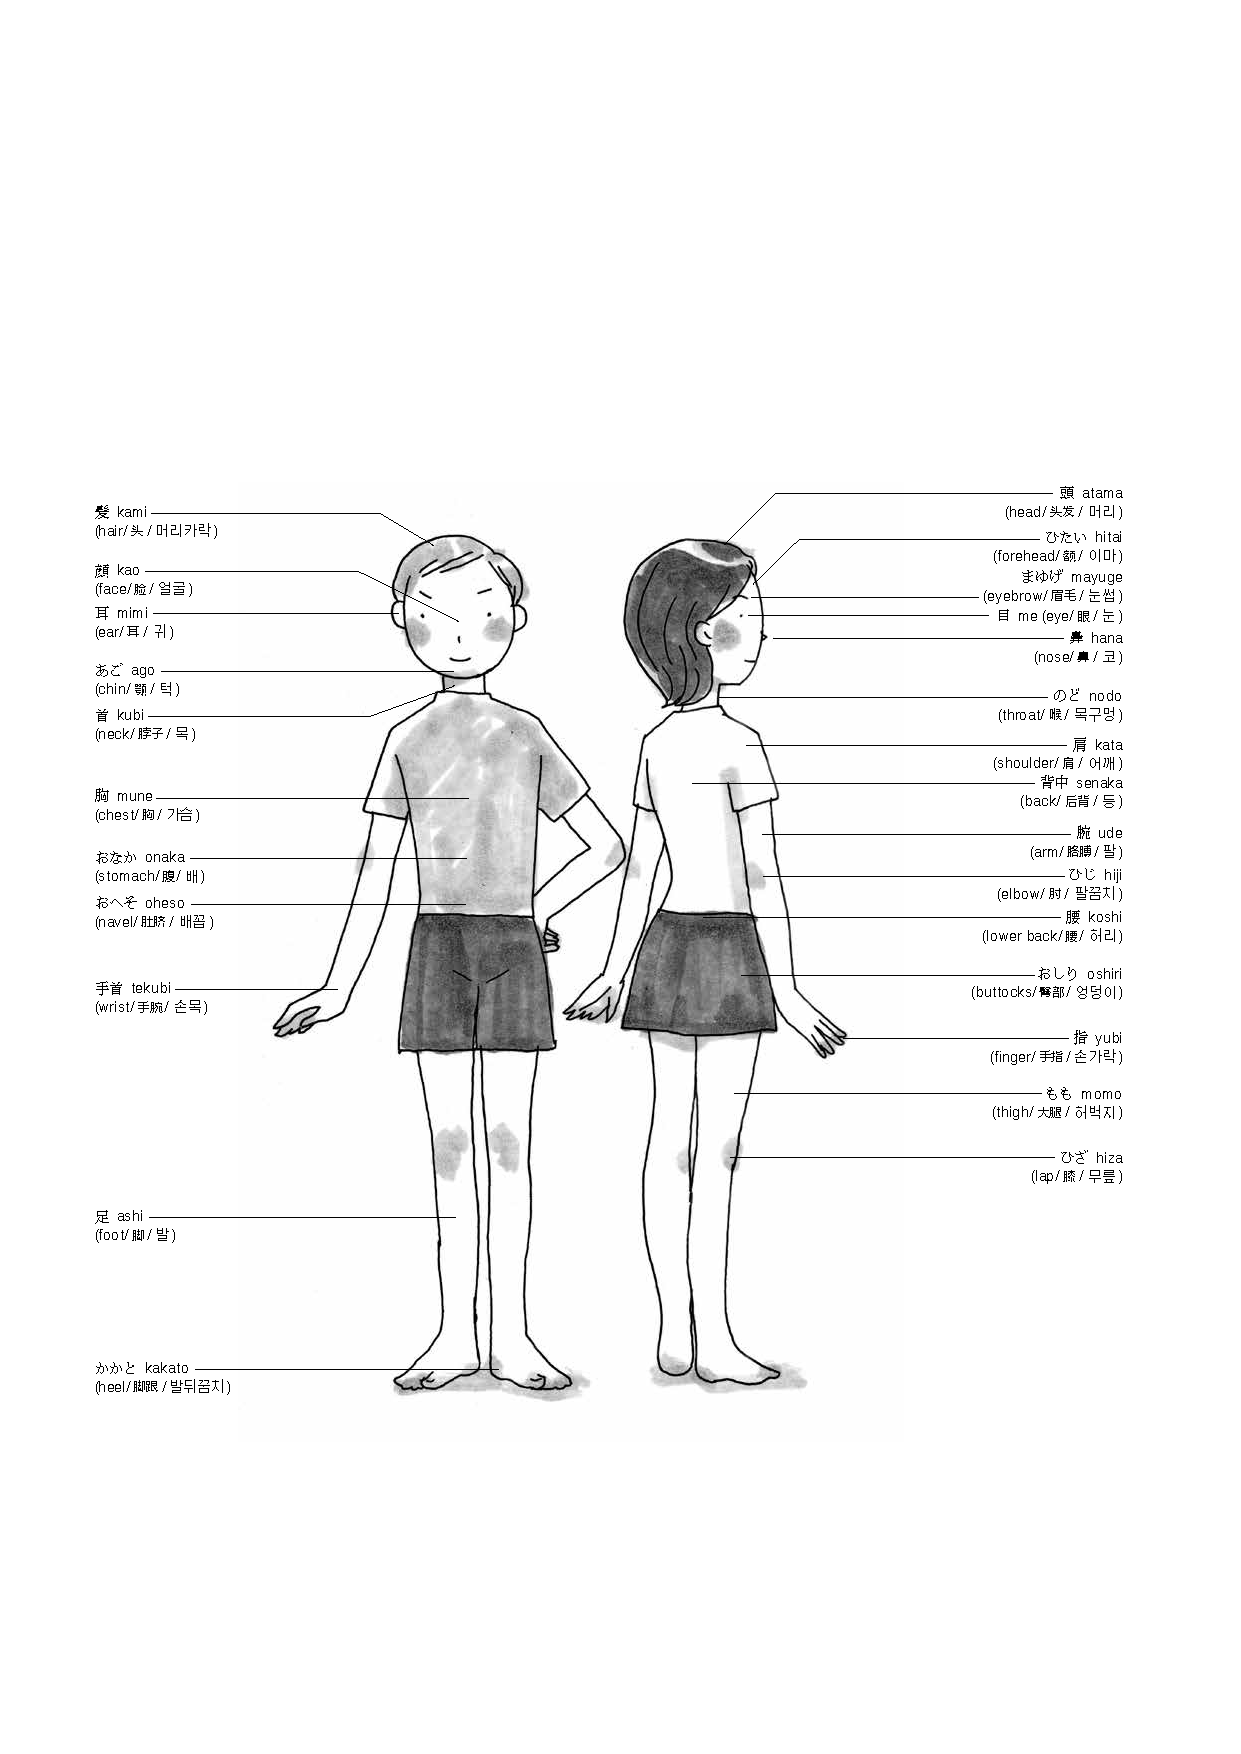 An illustration of vocabulary of body parts in Japanese/English